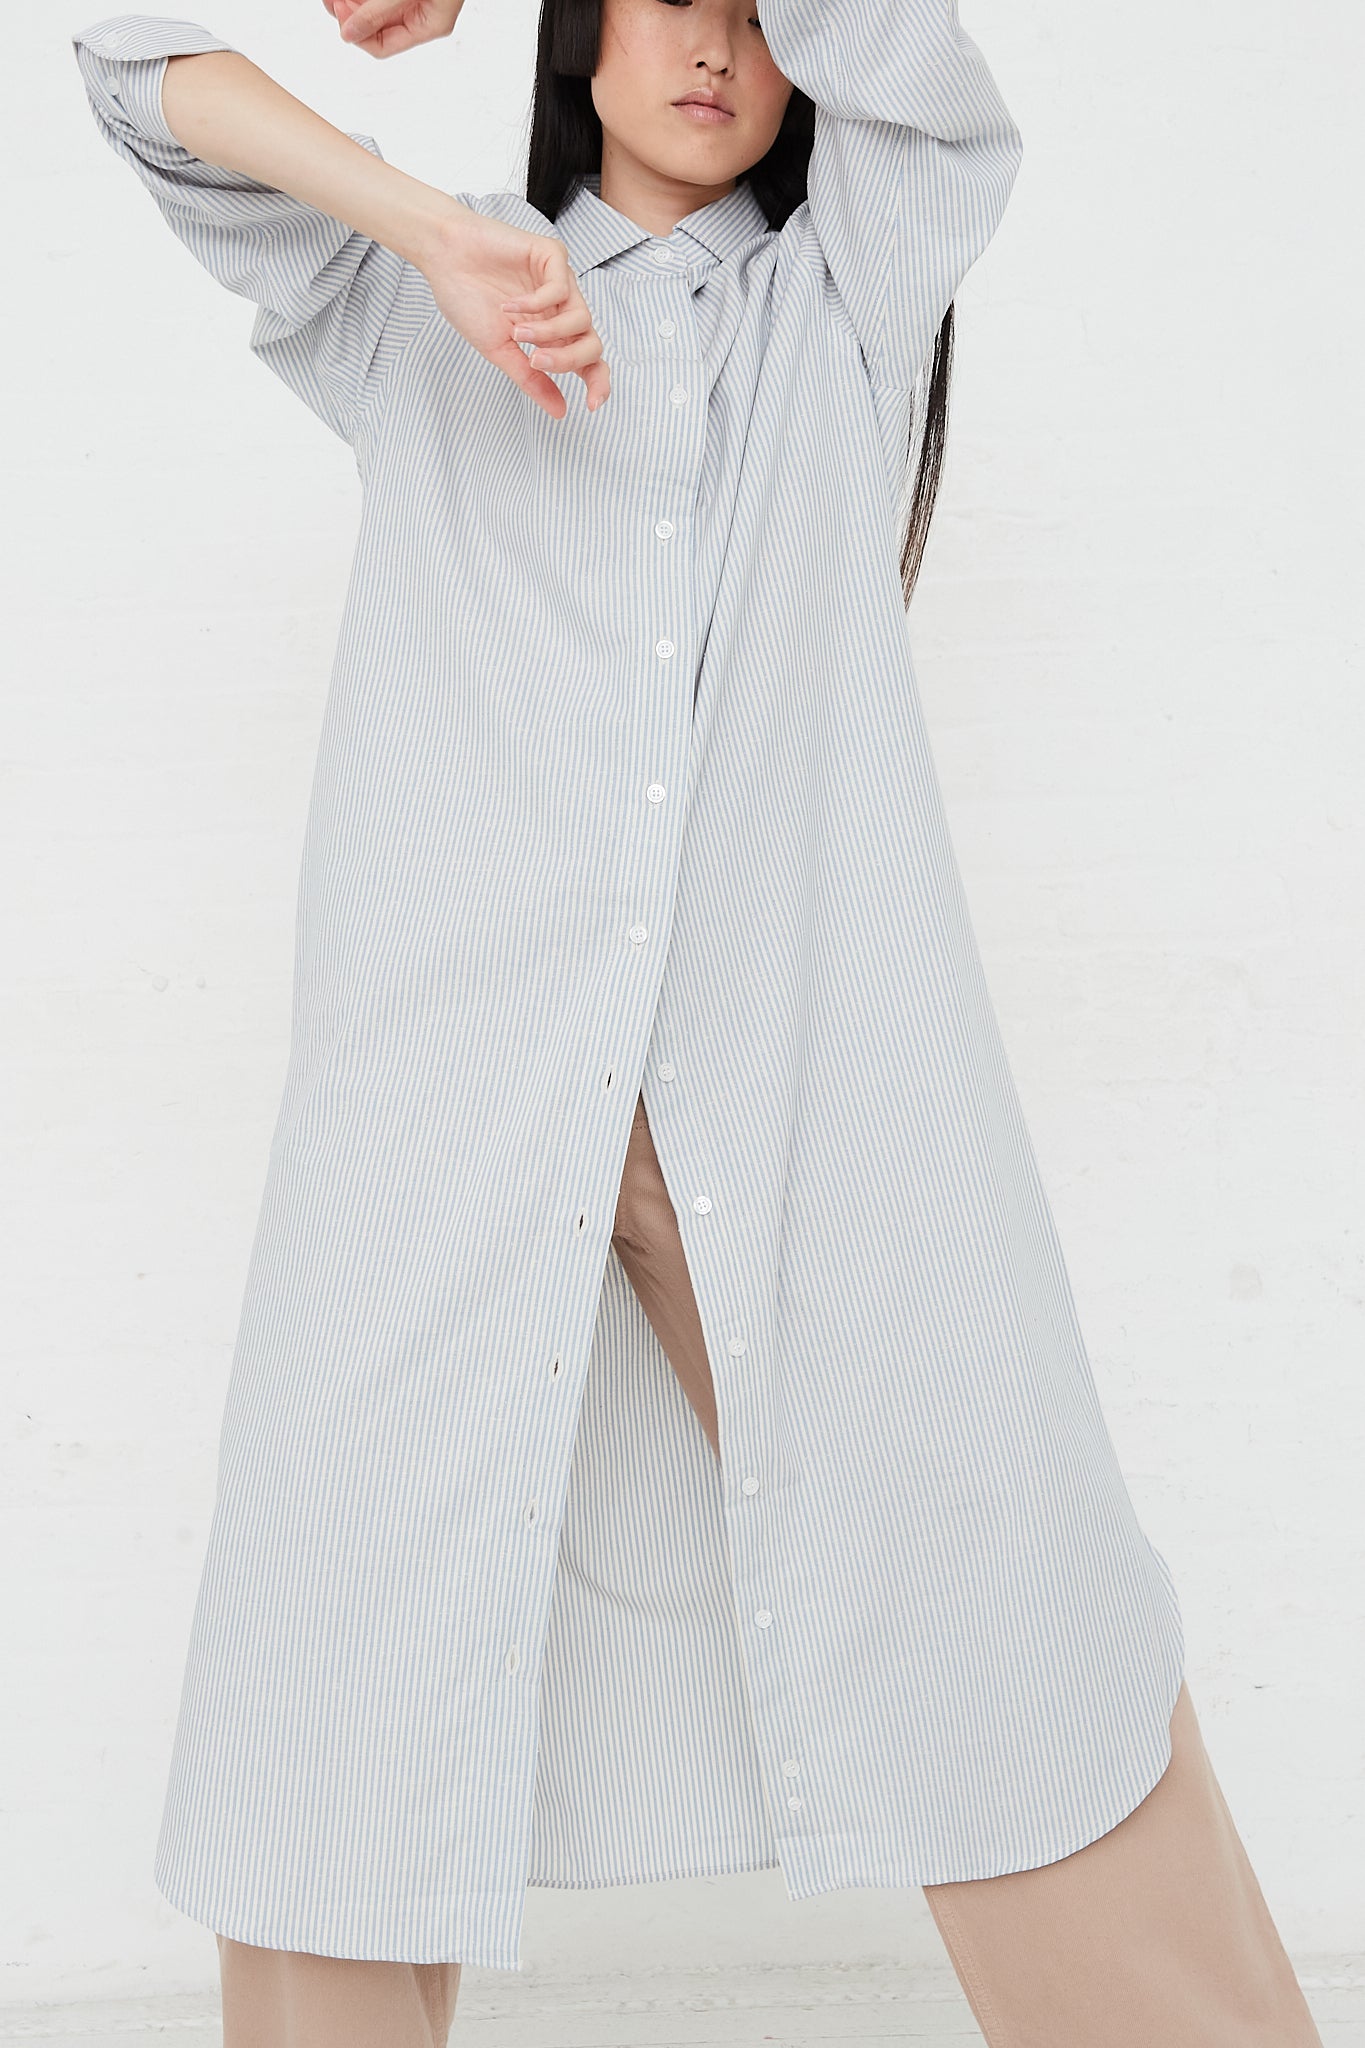 Ole Long Sleeve Shirt Dress in Organic Cotton by Baserange for Oroboro Front